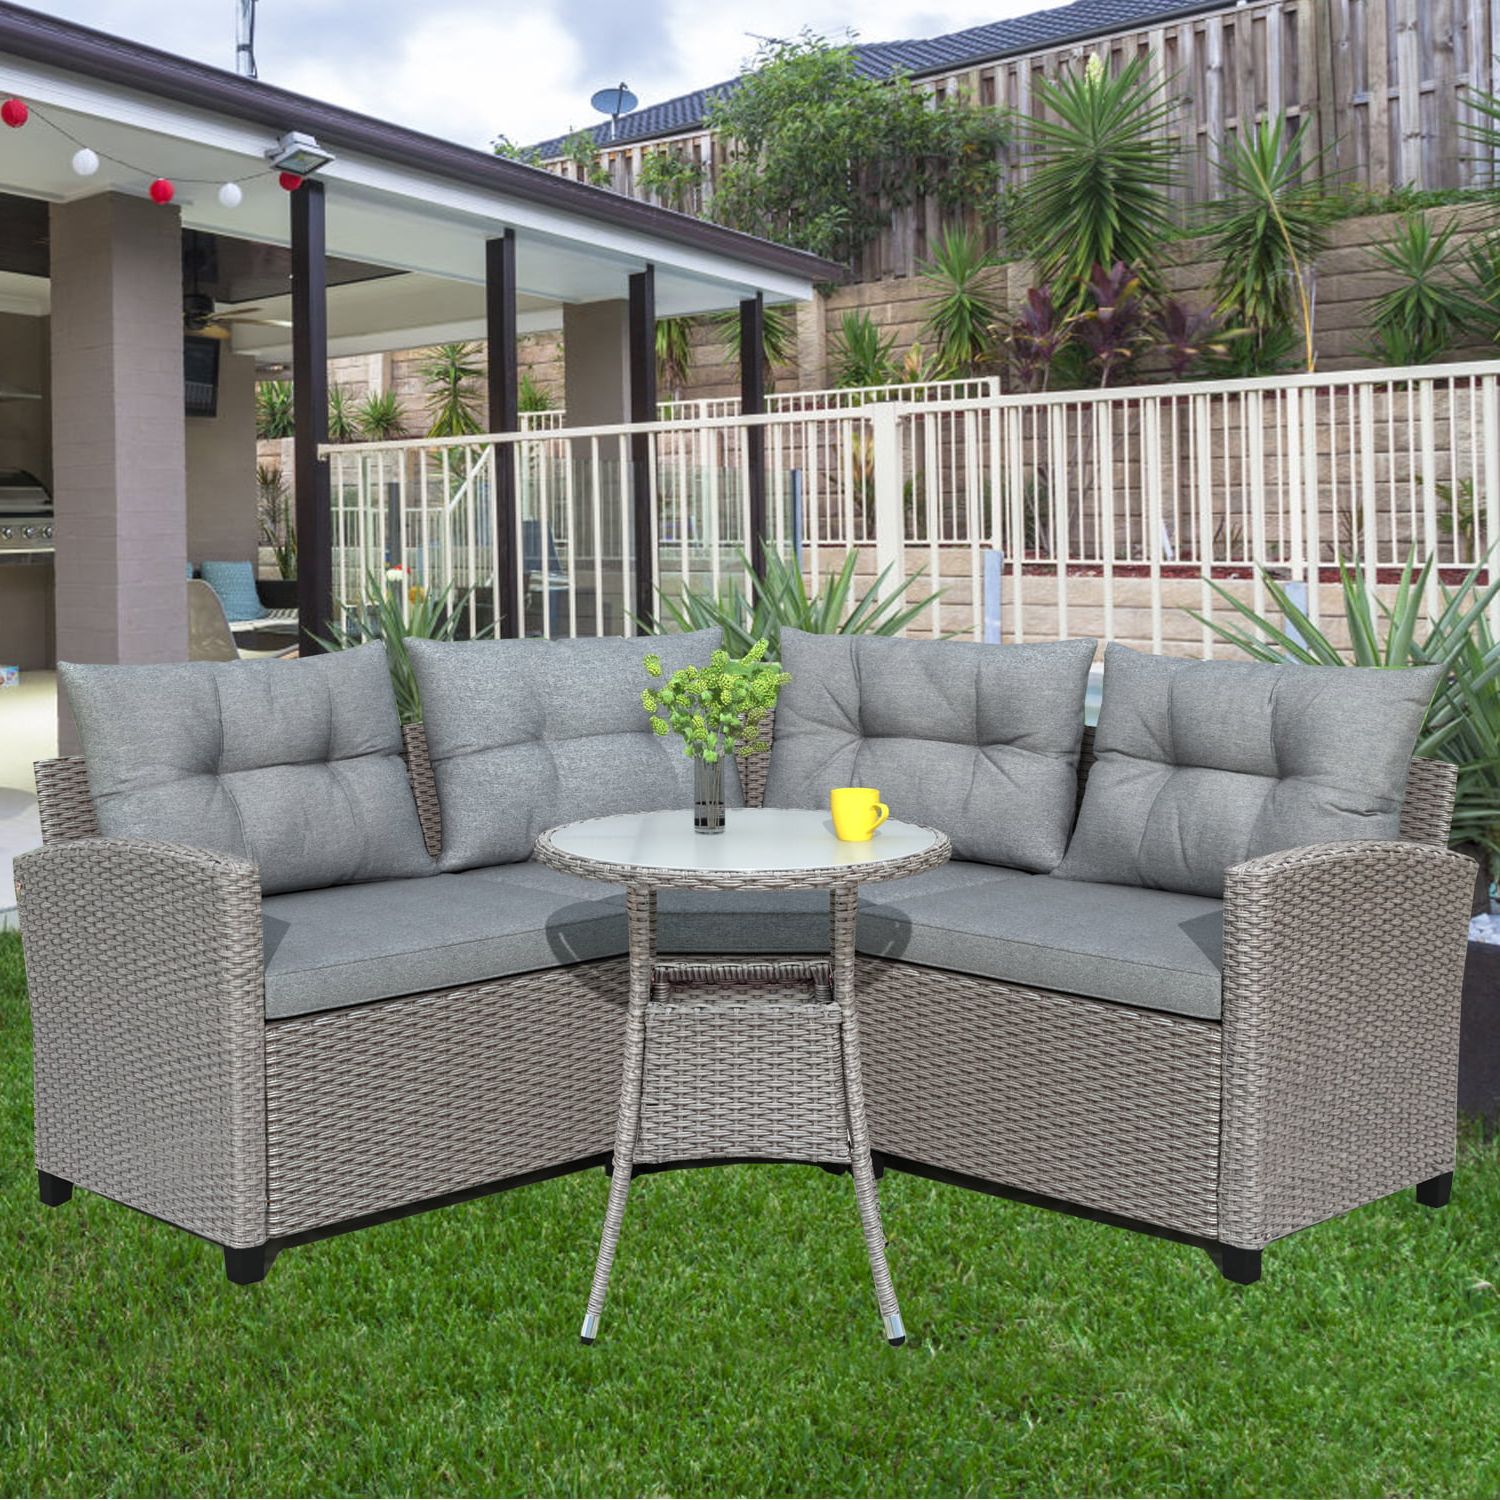 4 Piece Outdoor Patio Sofa Furniture Sets, Gray Rattan Wicker Patio Set Pertaining To Most Recent 4 Piece Outdoor Sectional Patio Sets (View 7 of 15)